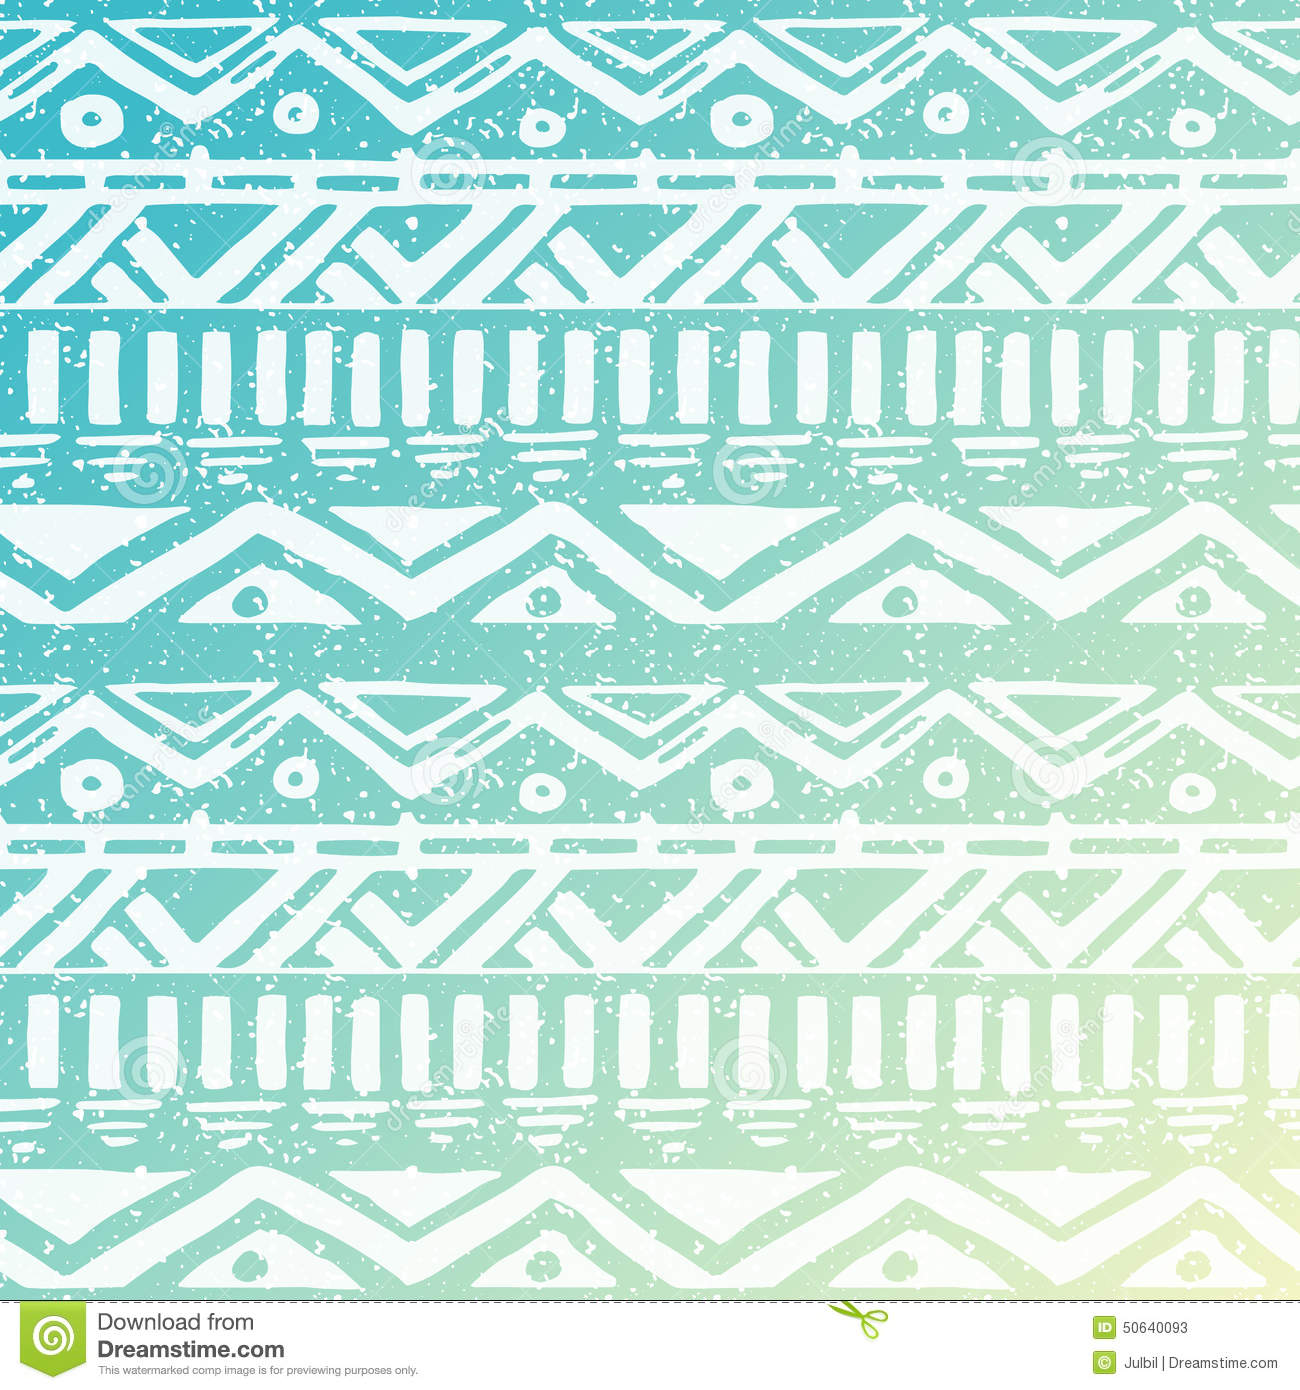 Gallery For Gt Teal Aztec Pattern